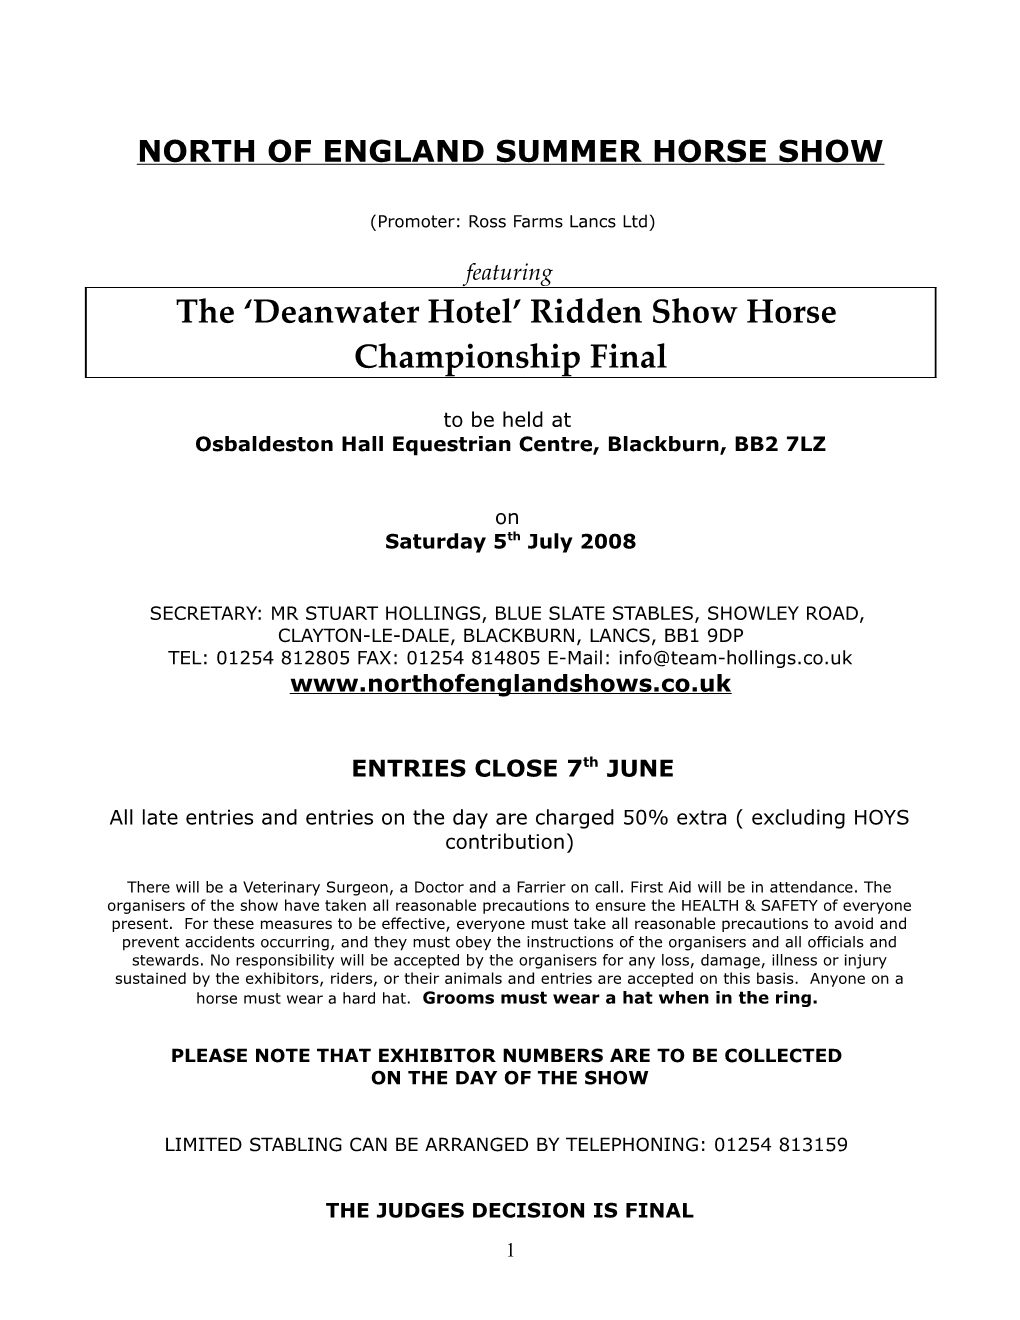 North of England Summer Horse Show